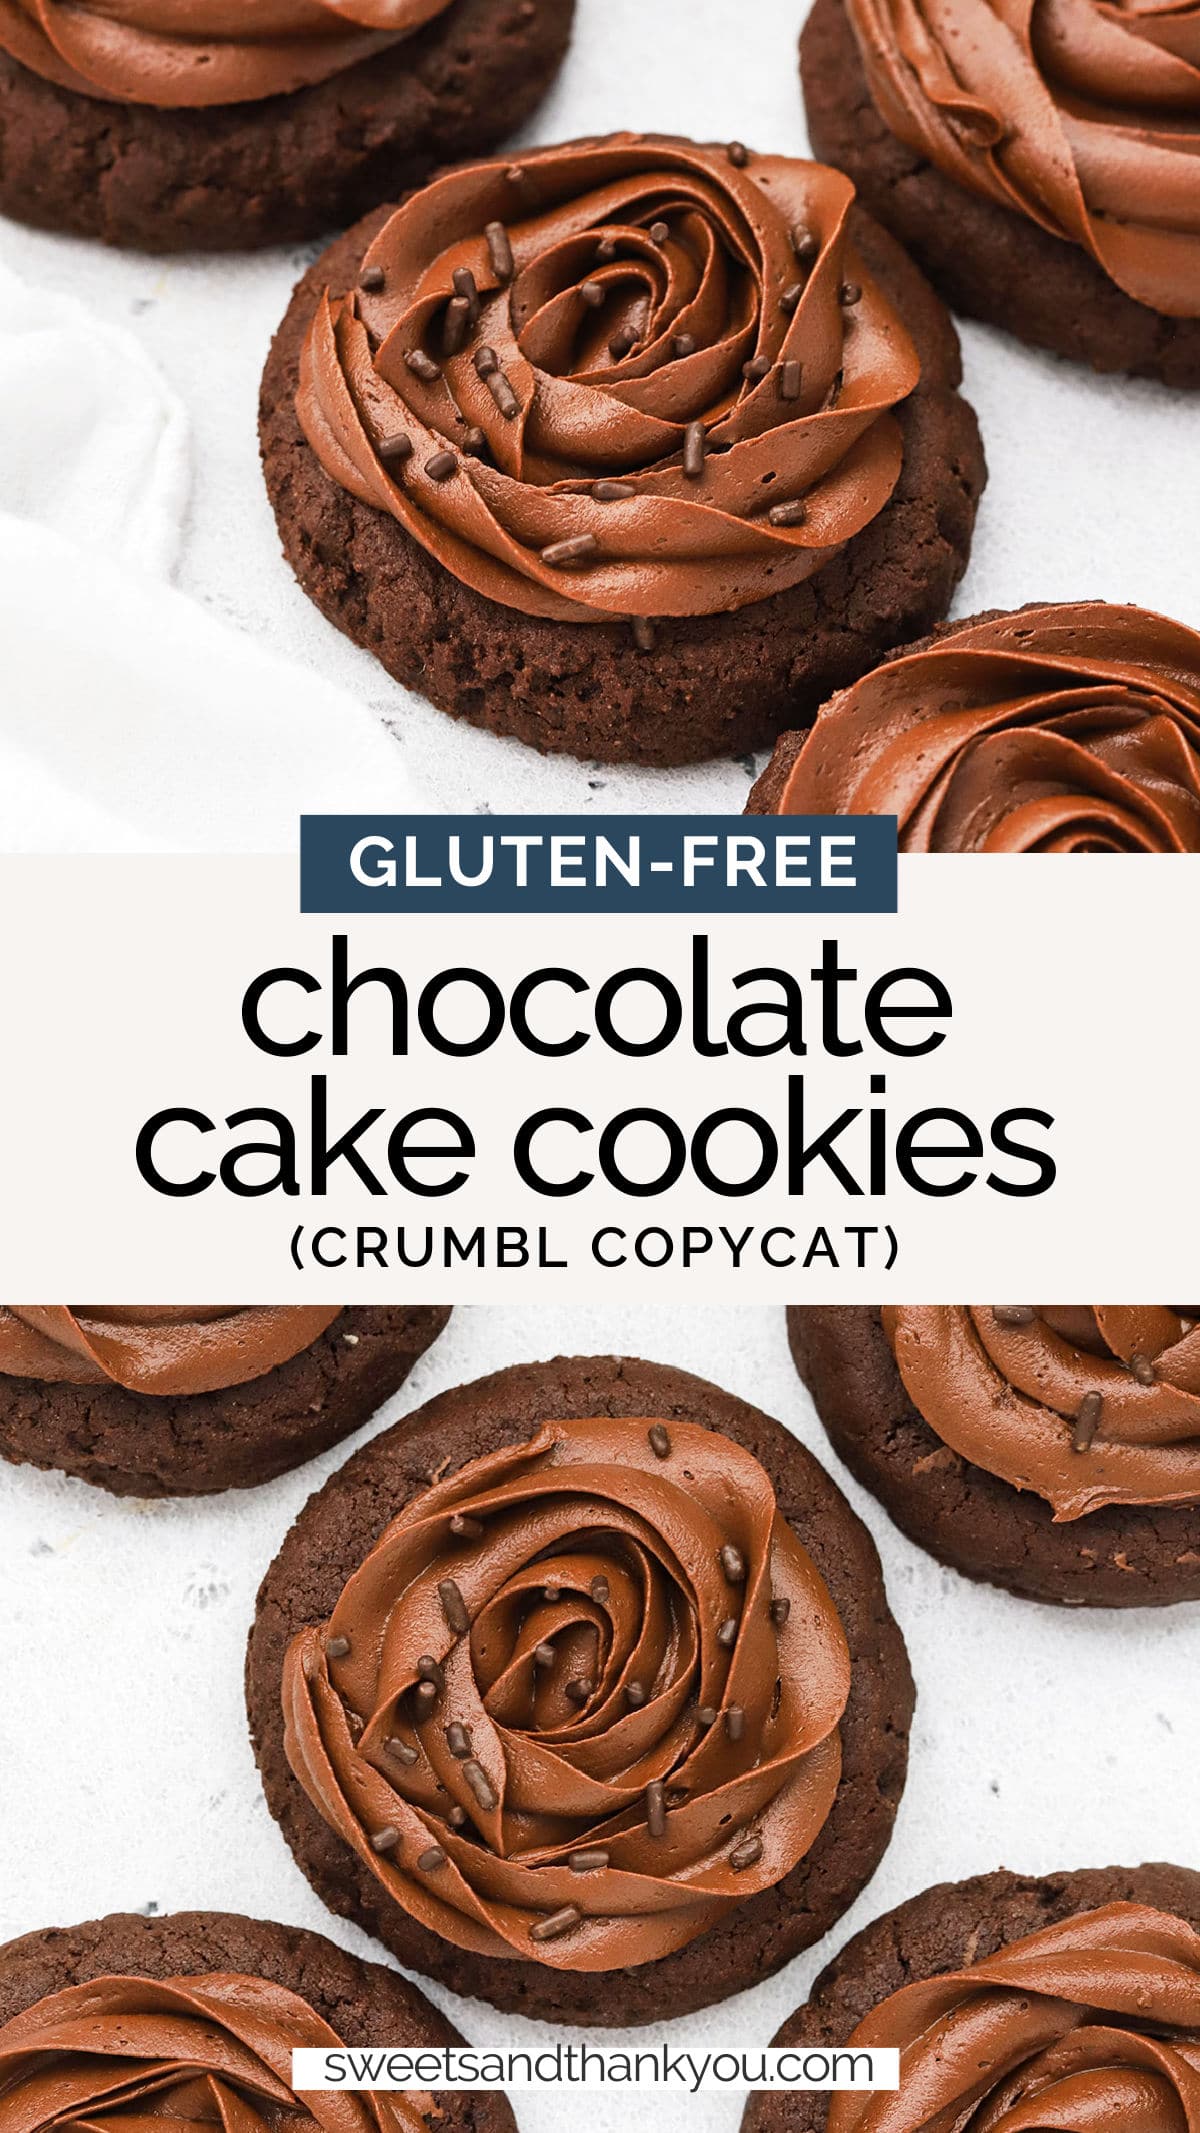 Gluten-Free Chocolate Cake Cookies - Our Crumbl copycat chocolate cake cookies with chocolate frosting are your new favorite way to satisfy a chocolate craving. You'll love these pretty cookies! // Gluten-Free Chocolate Cake Cookie Recipe // Gluten-Free Crumbl Cookies // Gluten-Free Chocolate Cookies // Gluten-Free Crumbl Copycat Cookies // Gluten-Free Bakery Style Cookies #glutenfreecookies #crumblcookies #chocolatecookies #glutenfreebaking #cookies #chocolate #crumbl